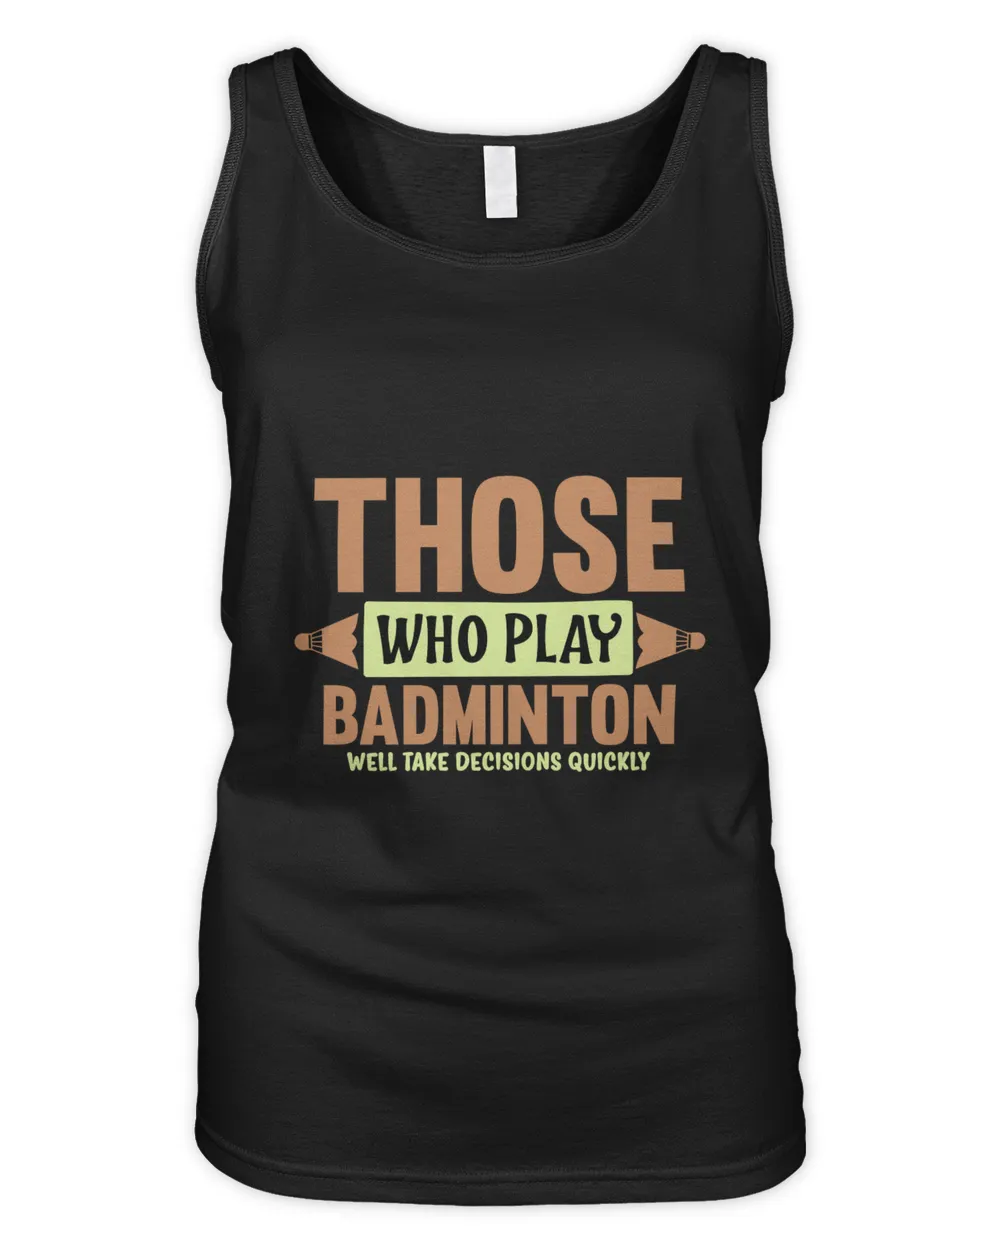 THOSE WHO PLAY BADMINTON WELL TAKE DECISIONS QUICKLY Shirt, Badminton Shirt,Badminton T-shirt,Funny Badminton Shirt, Badminton Gift,Sport Shirt